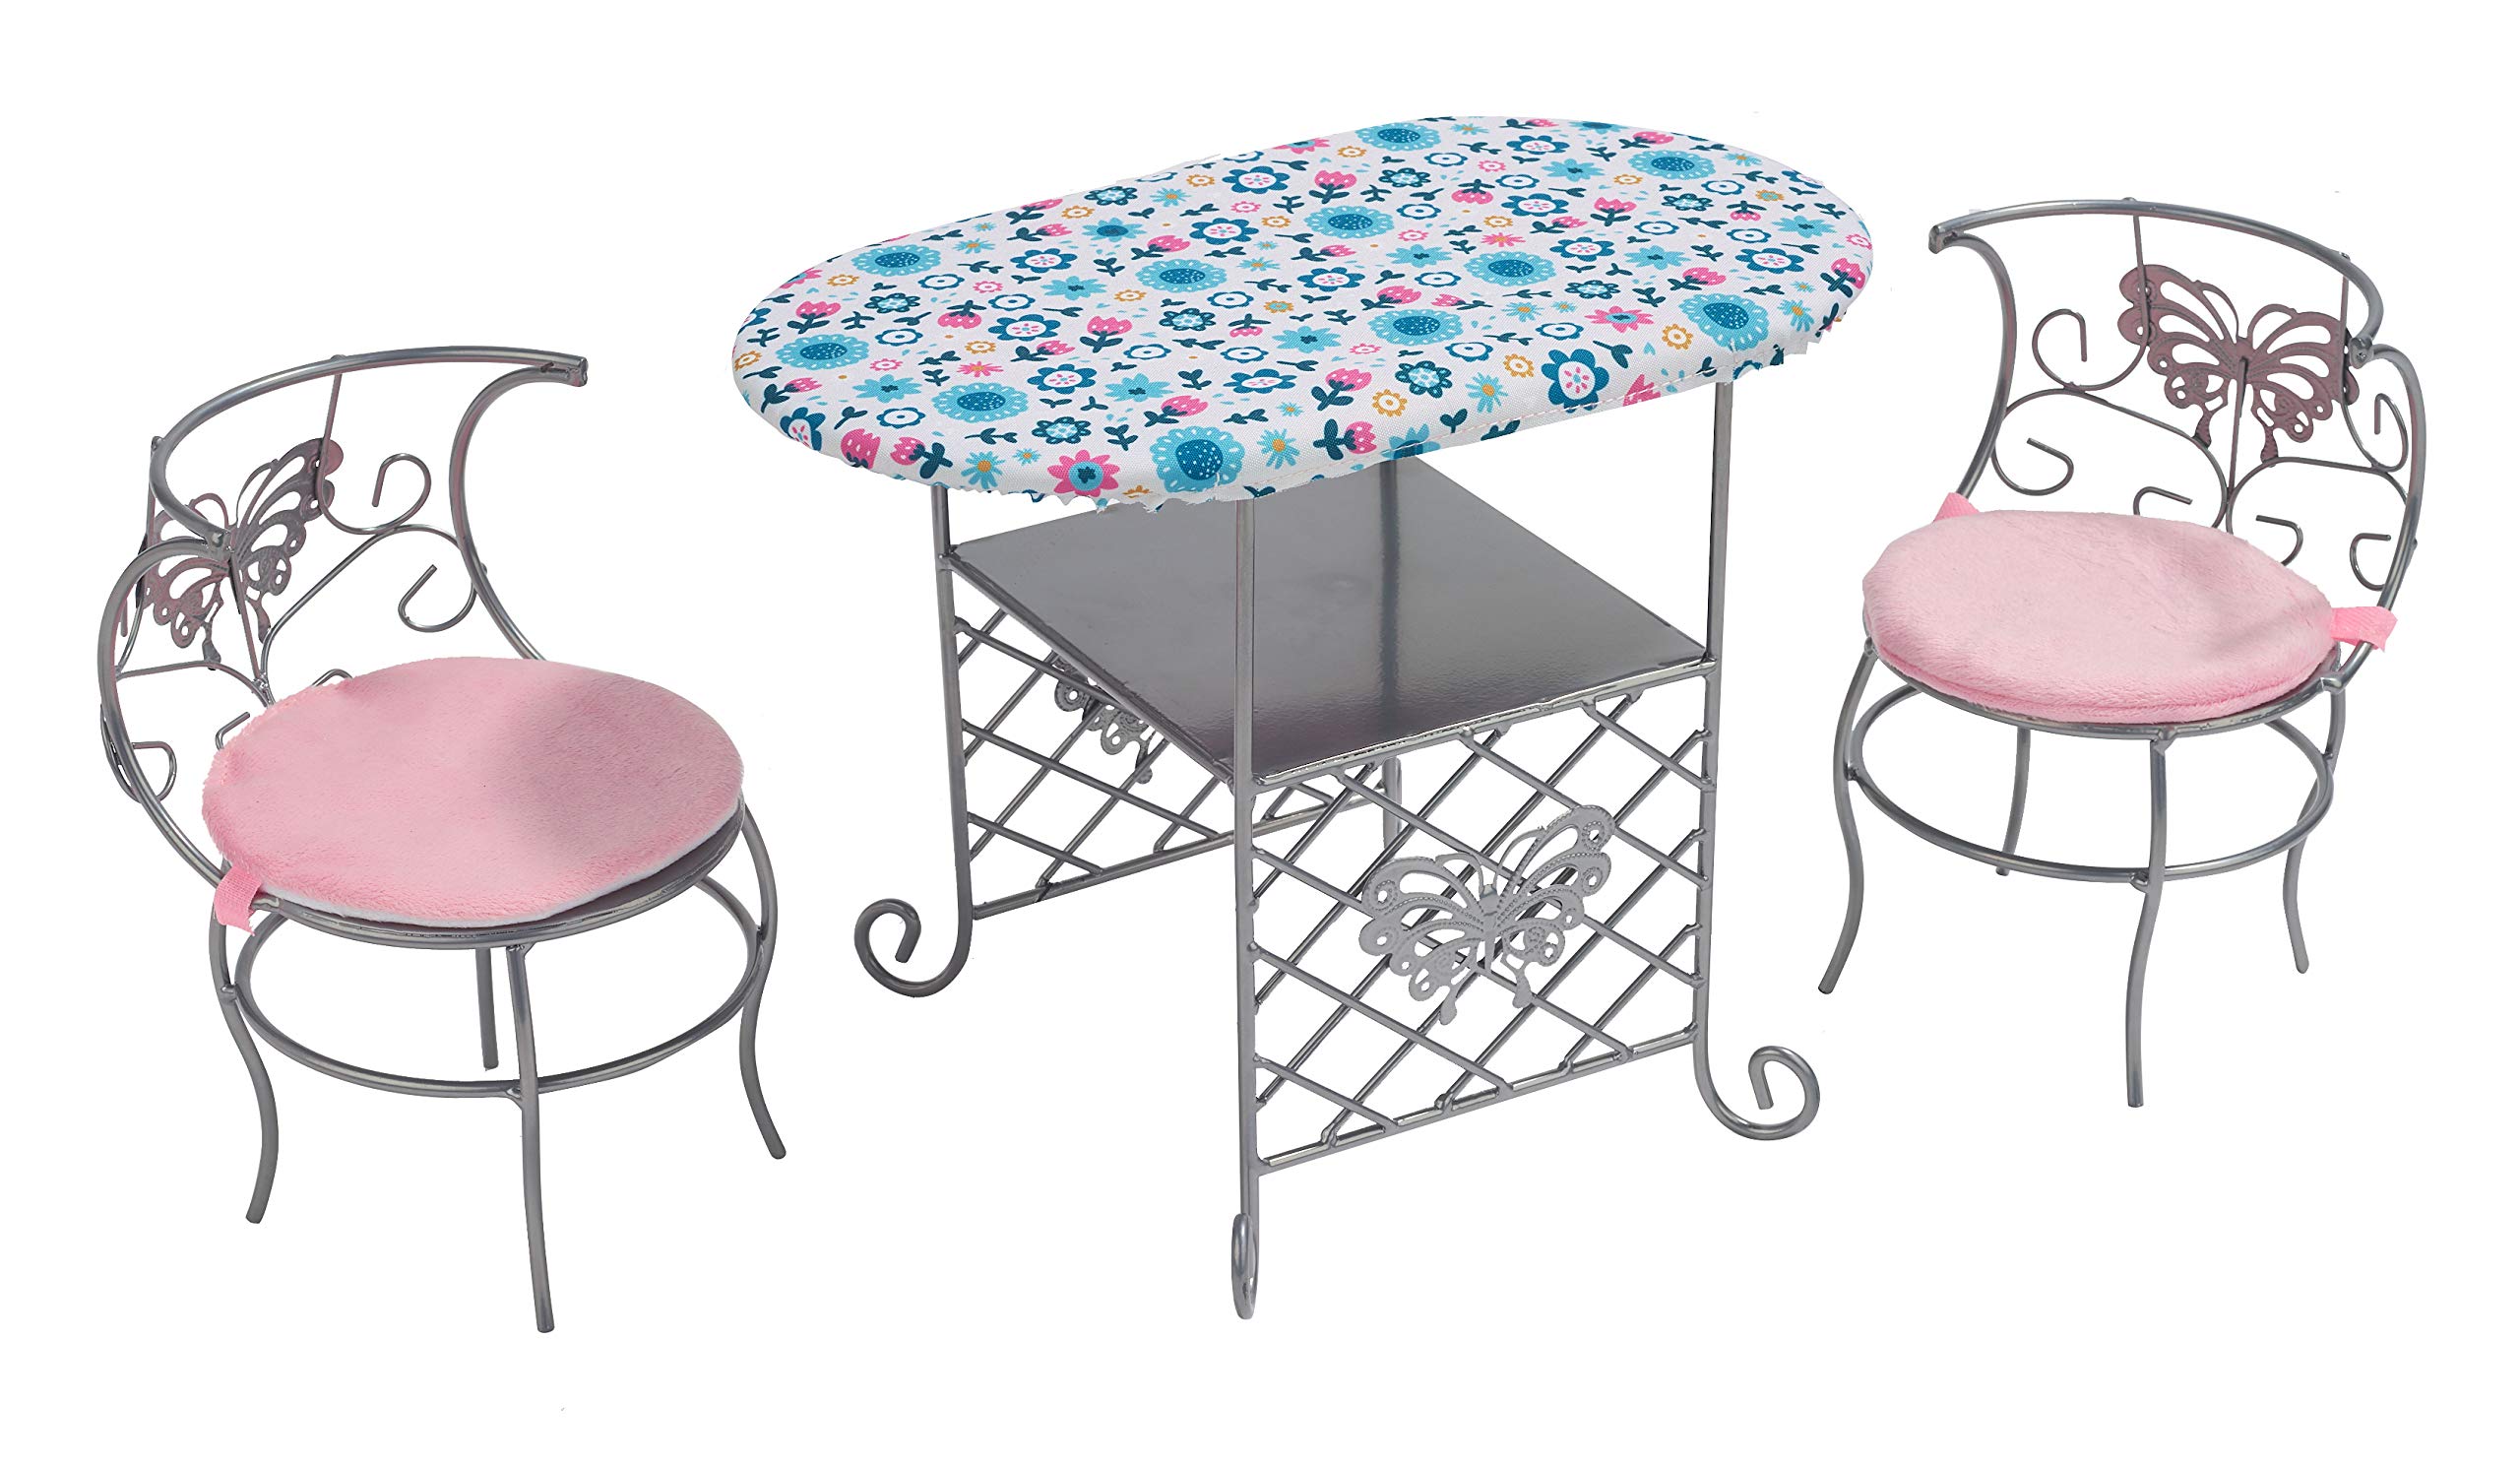 Badger Basket Tea Time Toy Metal Doll Table and Chair Set with Accessories for 18 inch Dolls - Silver/Pink/Multi